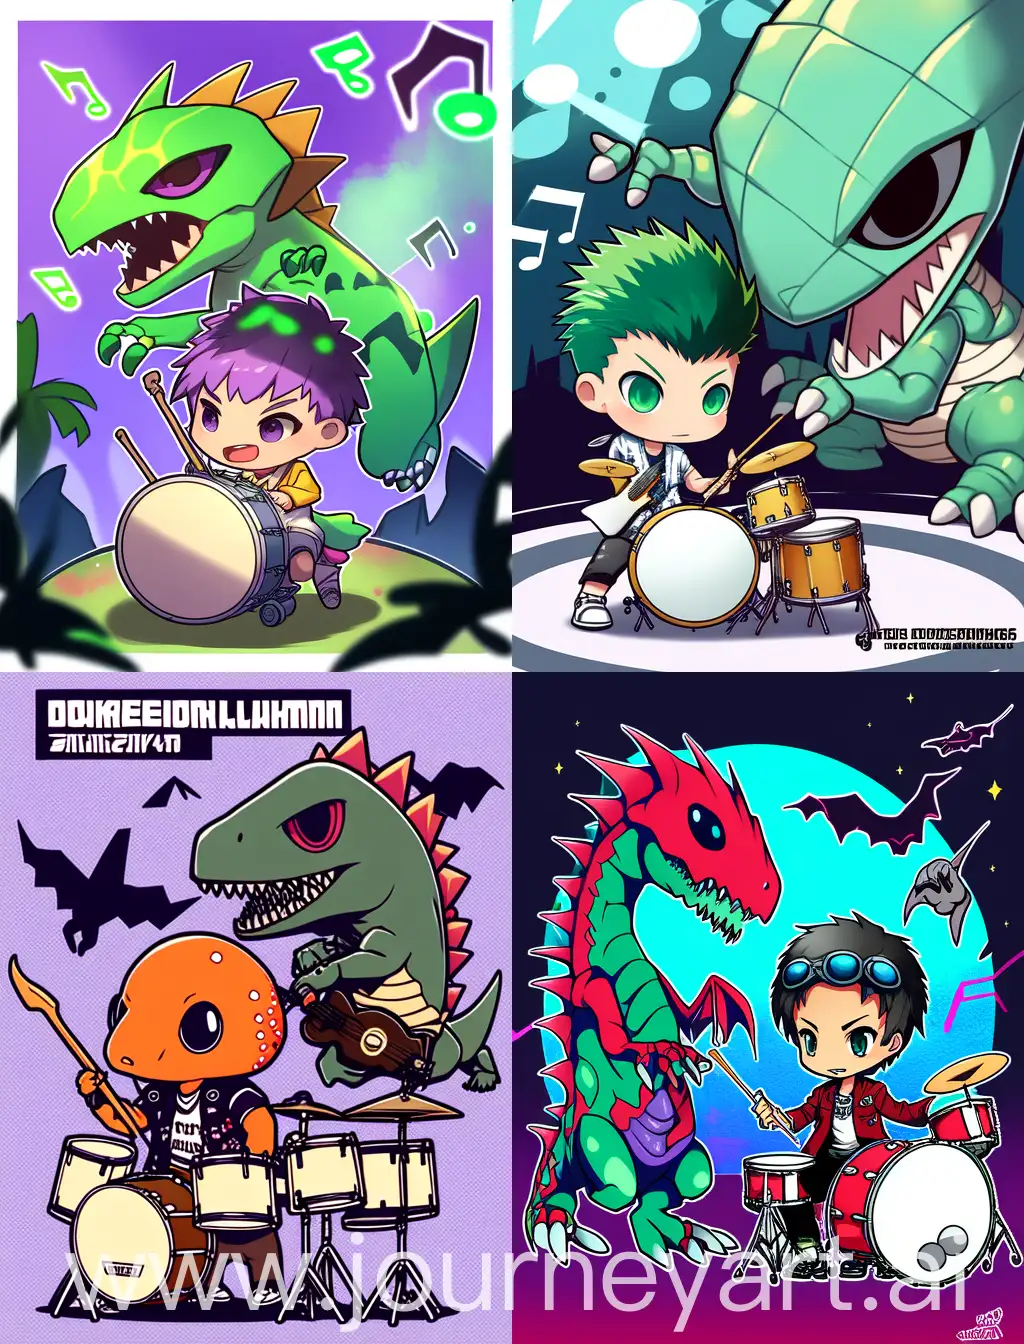 chibi dinosaur and anime guy playing drums, with spooky background, 